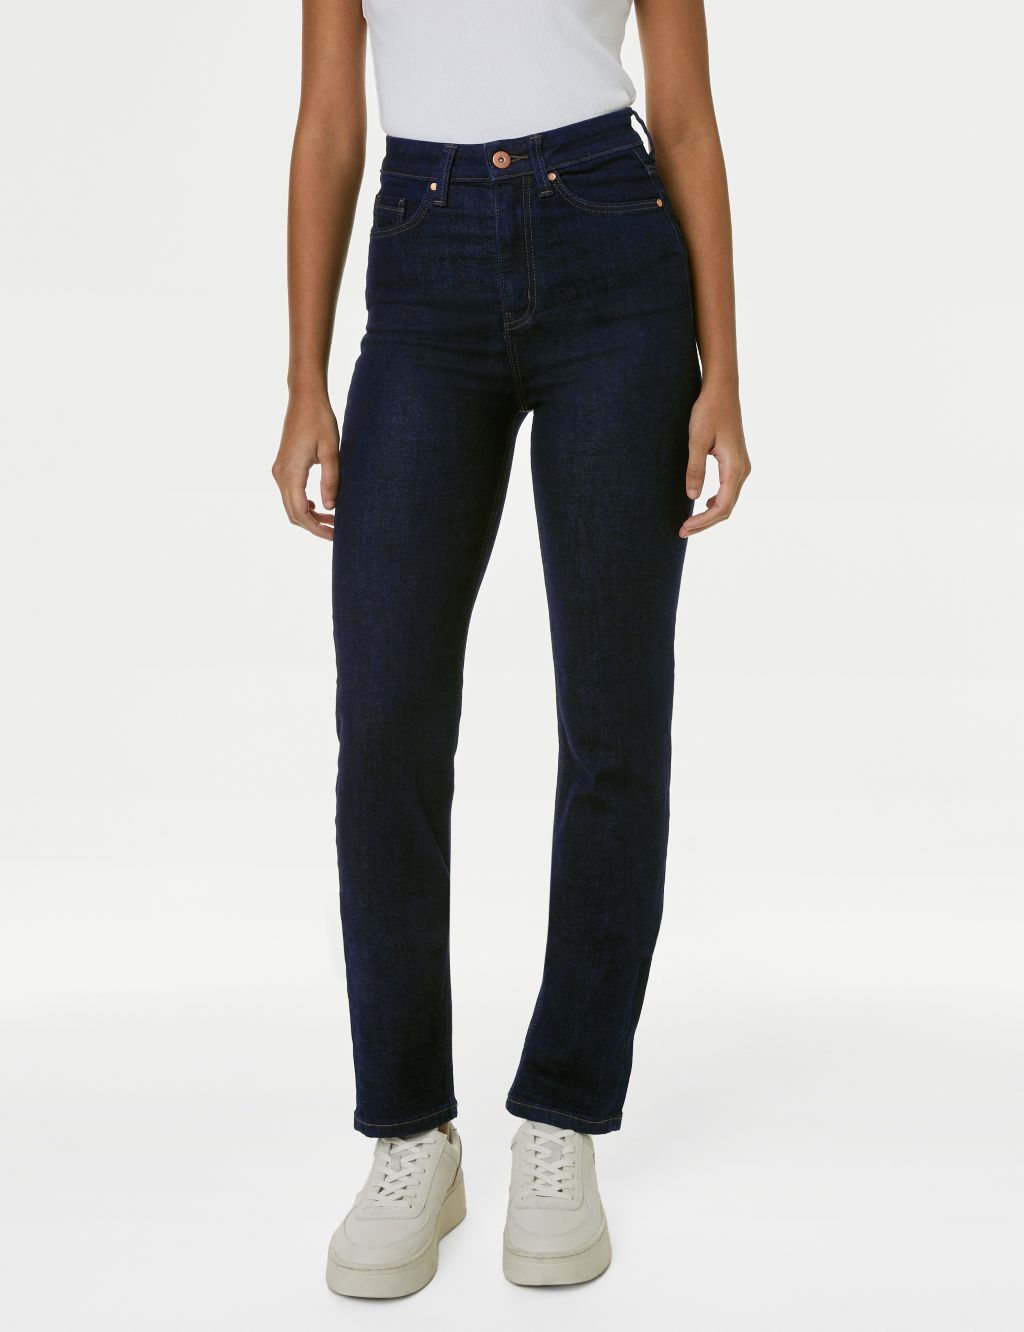 Sienna Supersoft Straight Leg Jeans image 3